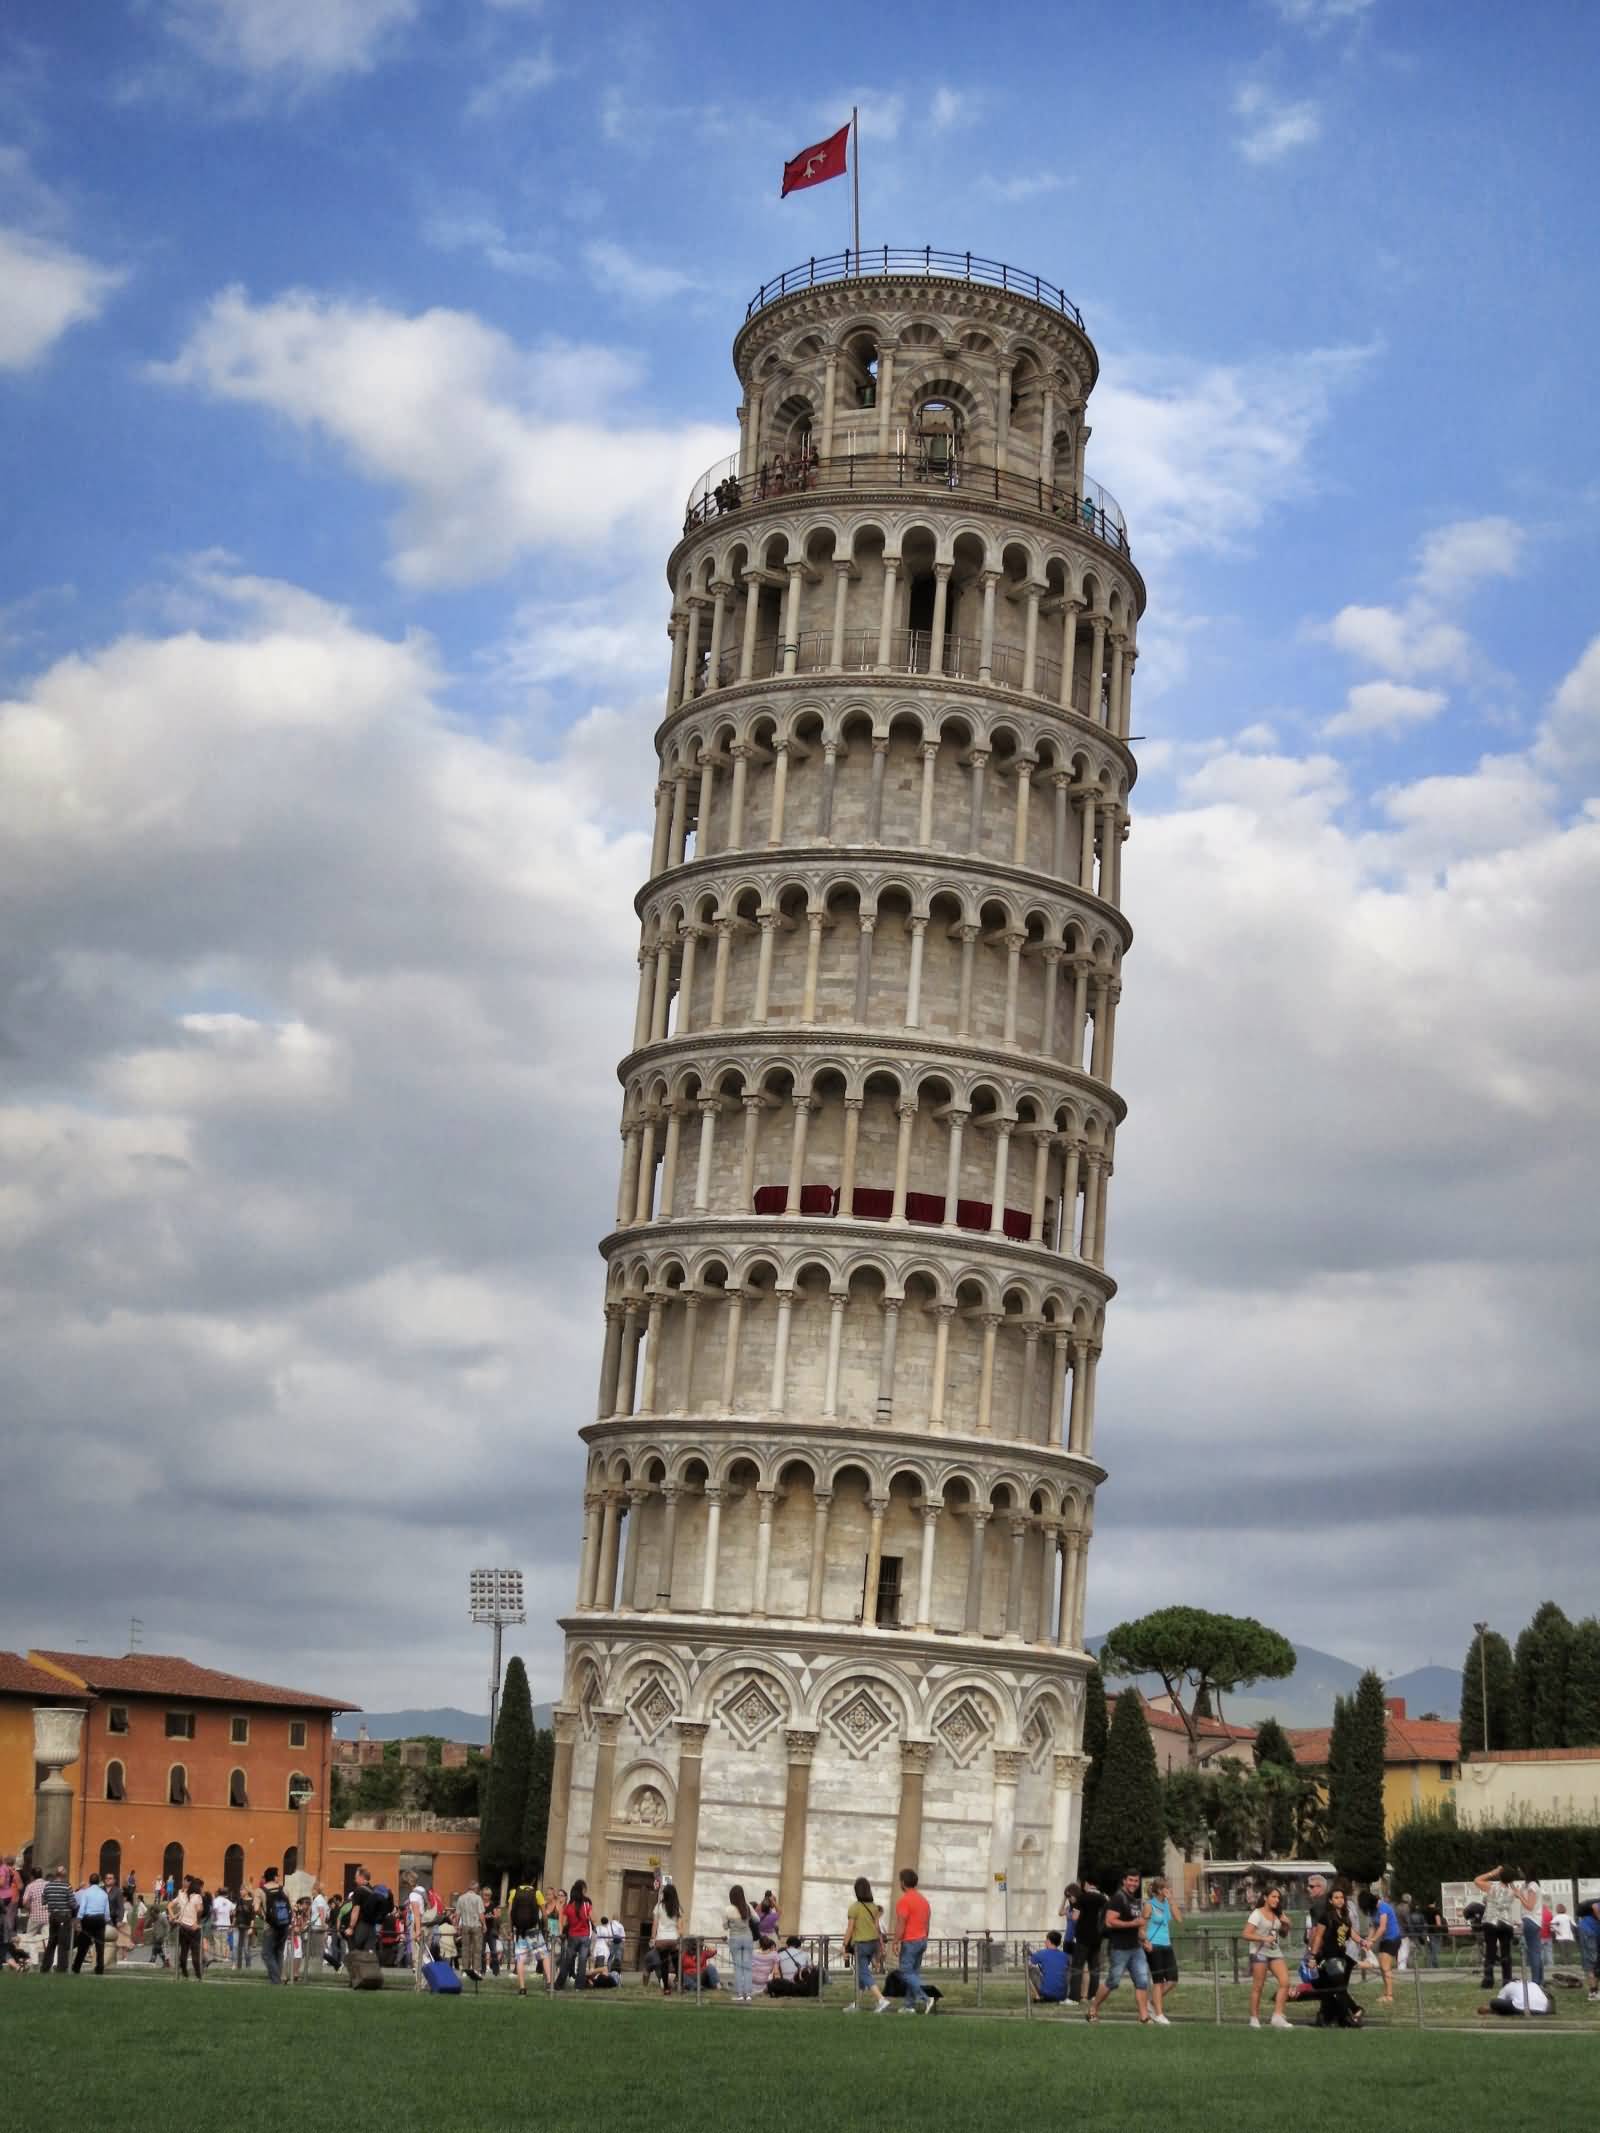 The Iconic Image Of The Leaning Tower of Pisa In Italy